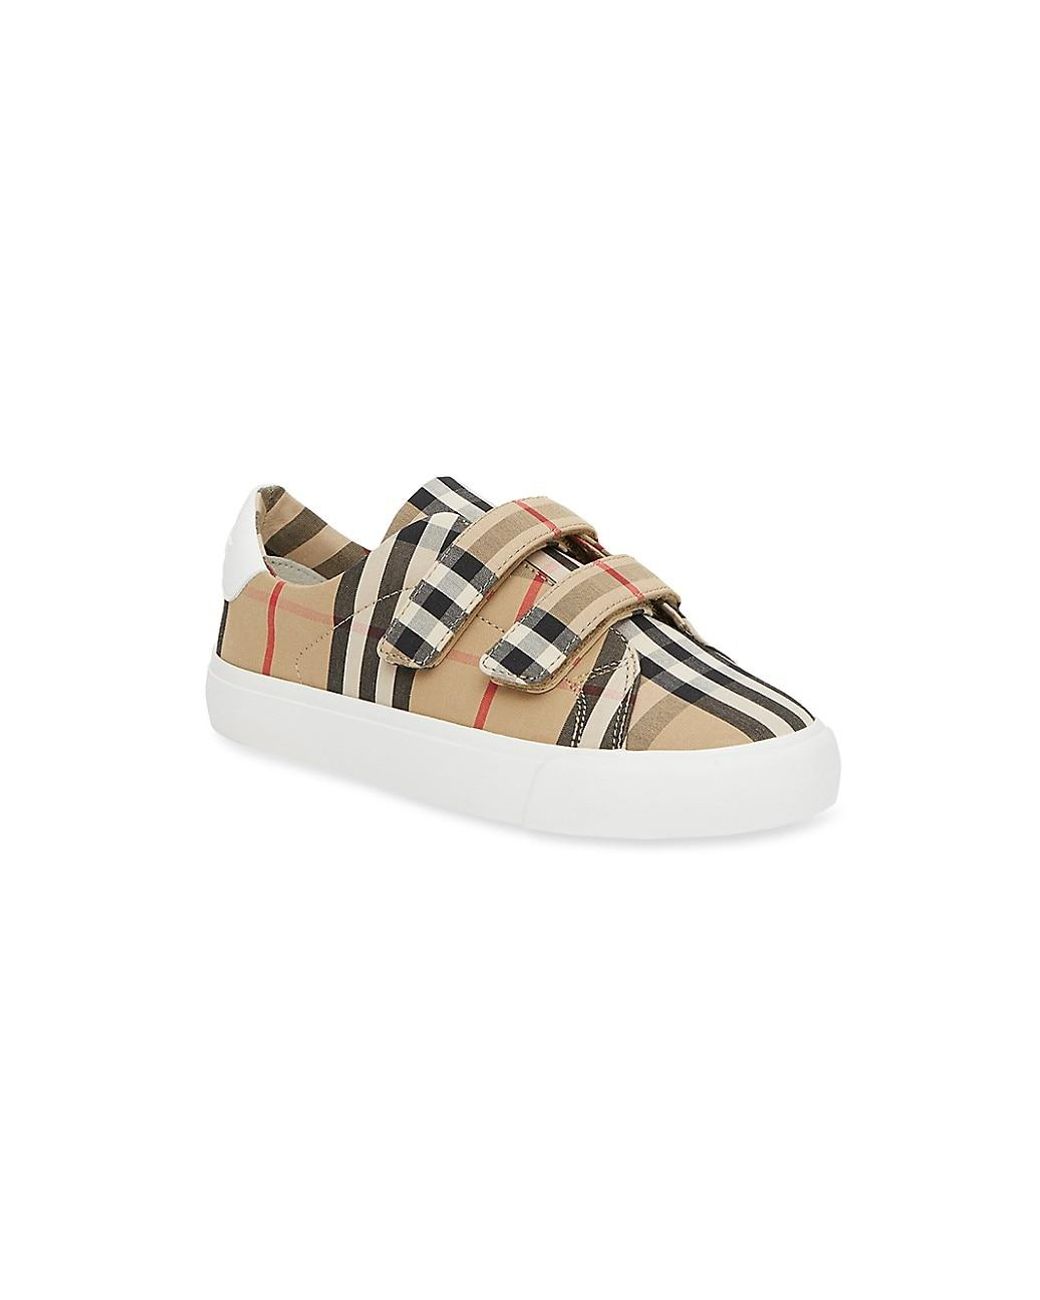 Burberry Baby's & Little Kid's Mini Markham Check Sneakers in Natural | Lyst